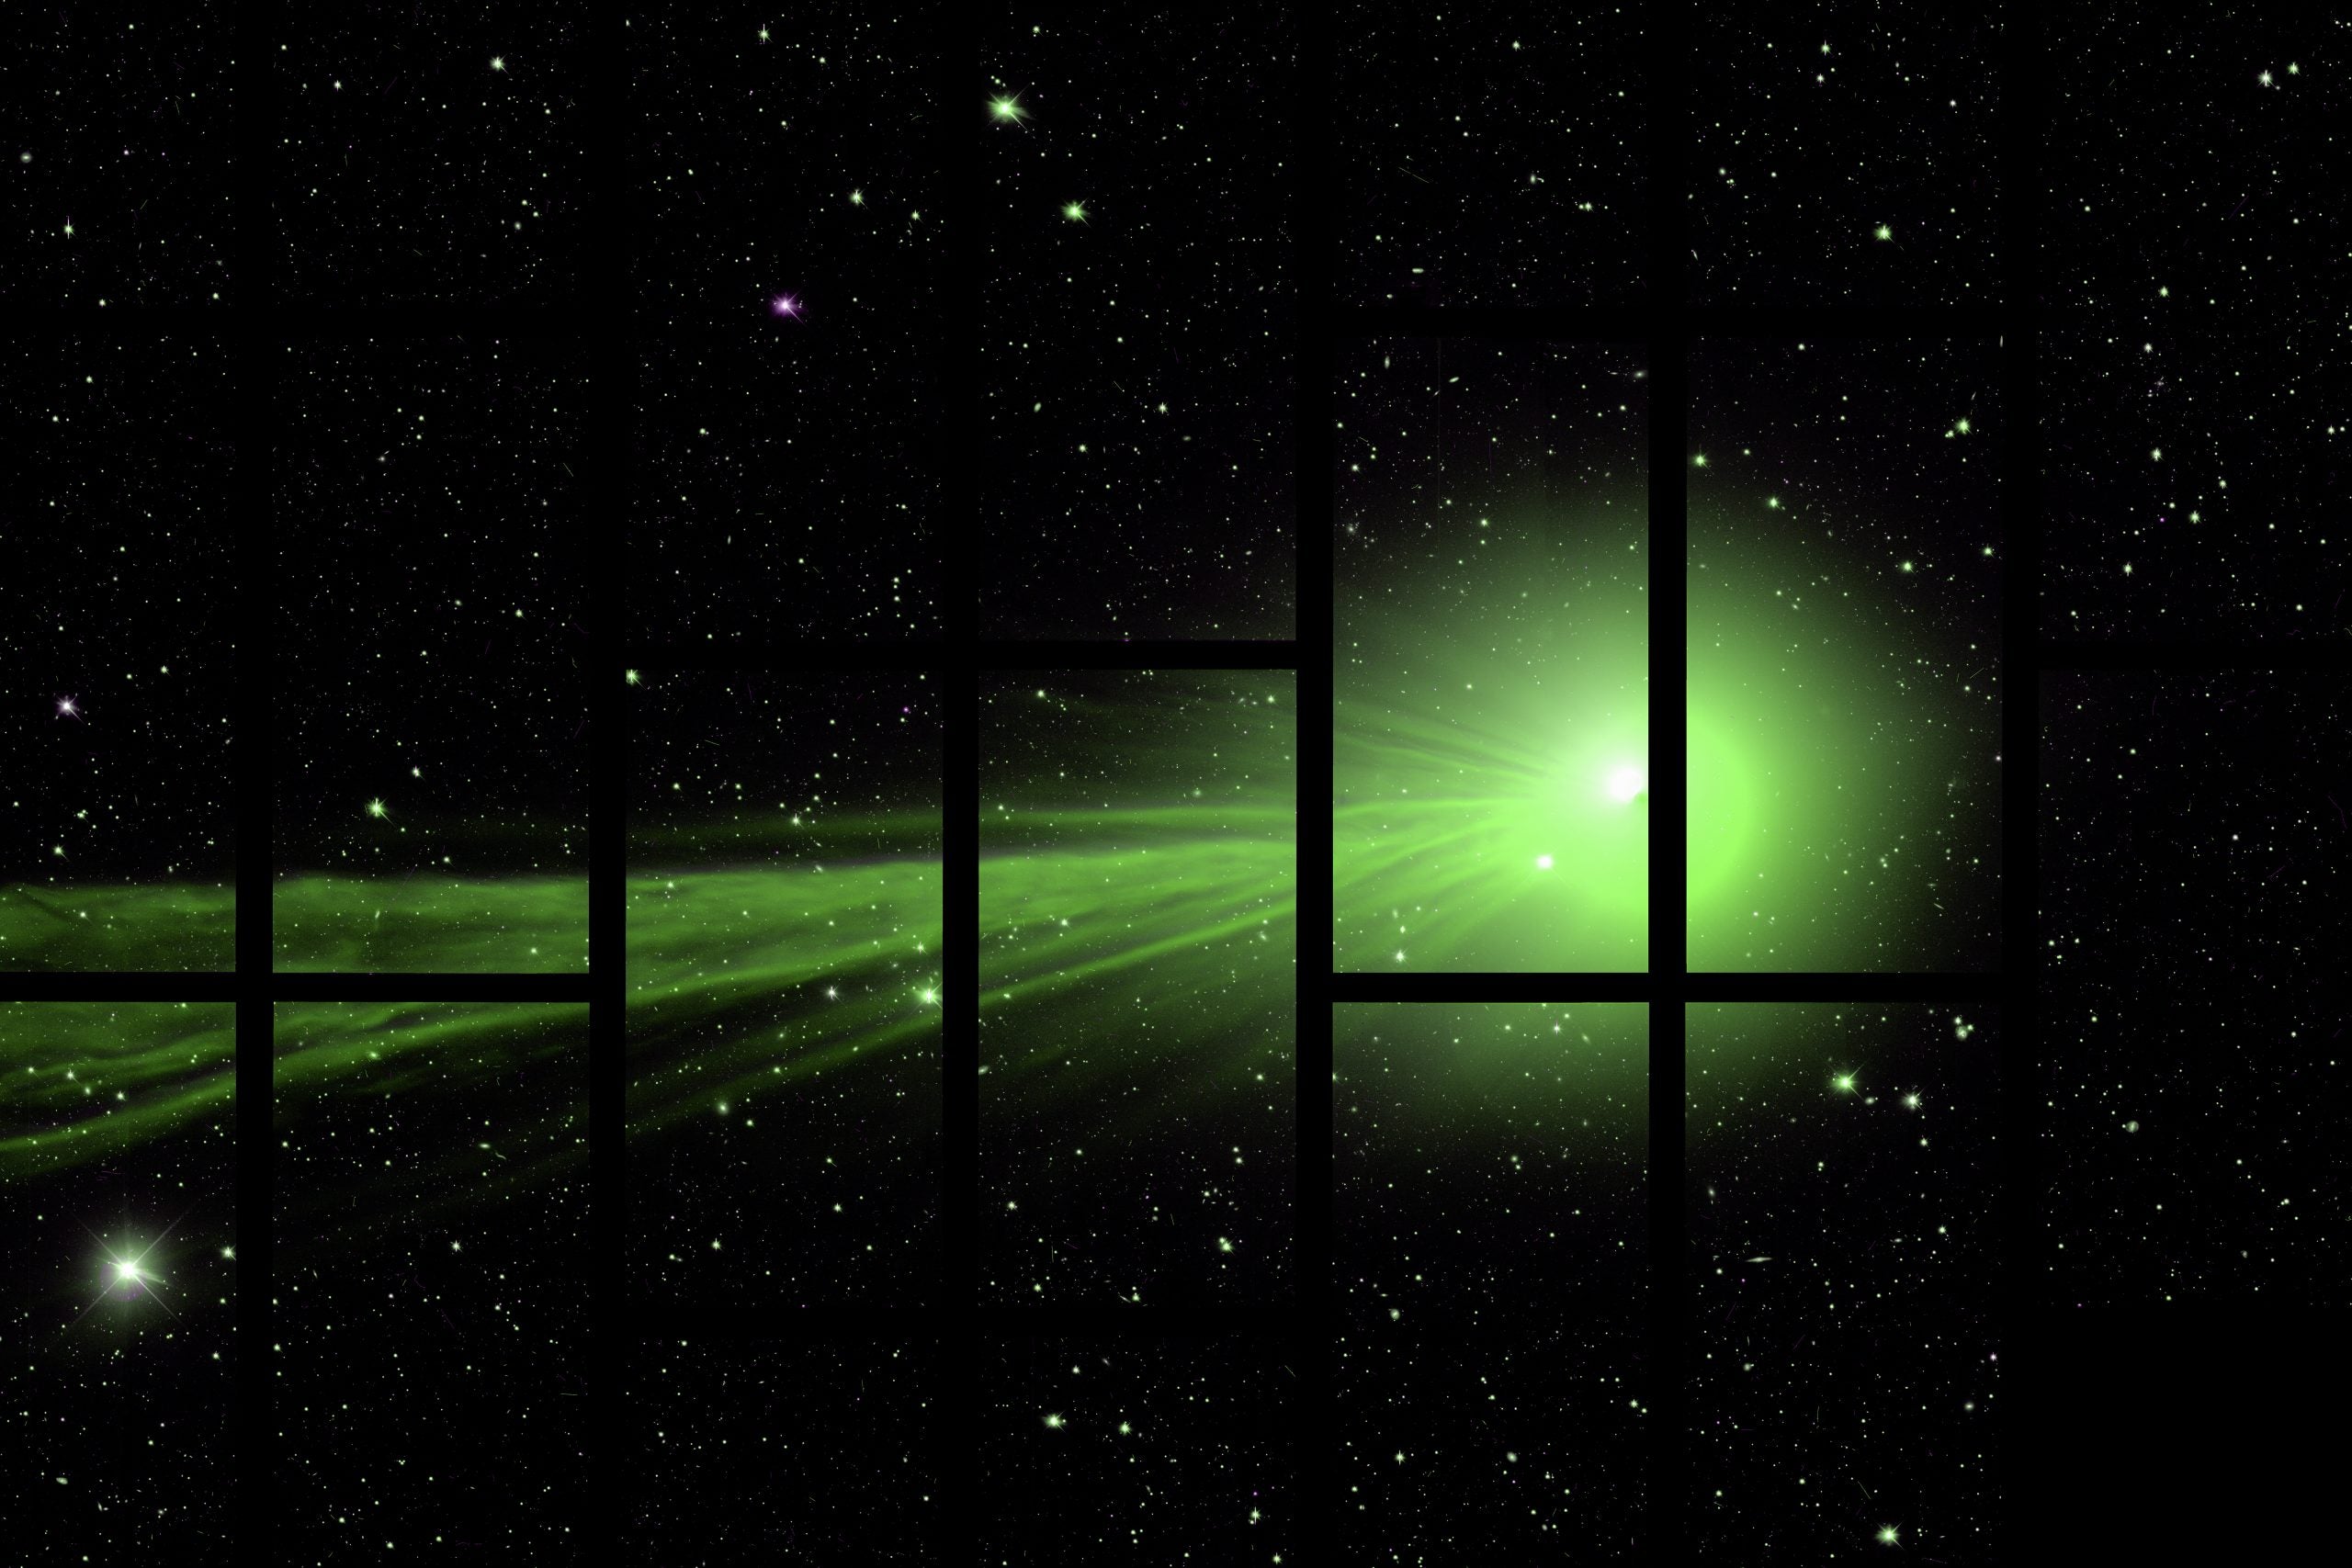 The Comet Lovejoy, as seen by several CCDs. (Image: Marty Murphy, Nikolay Kuropatkin, Huan Lin and Brian Yanny; Dark Energy Survey)